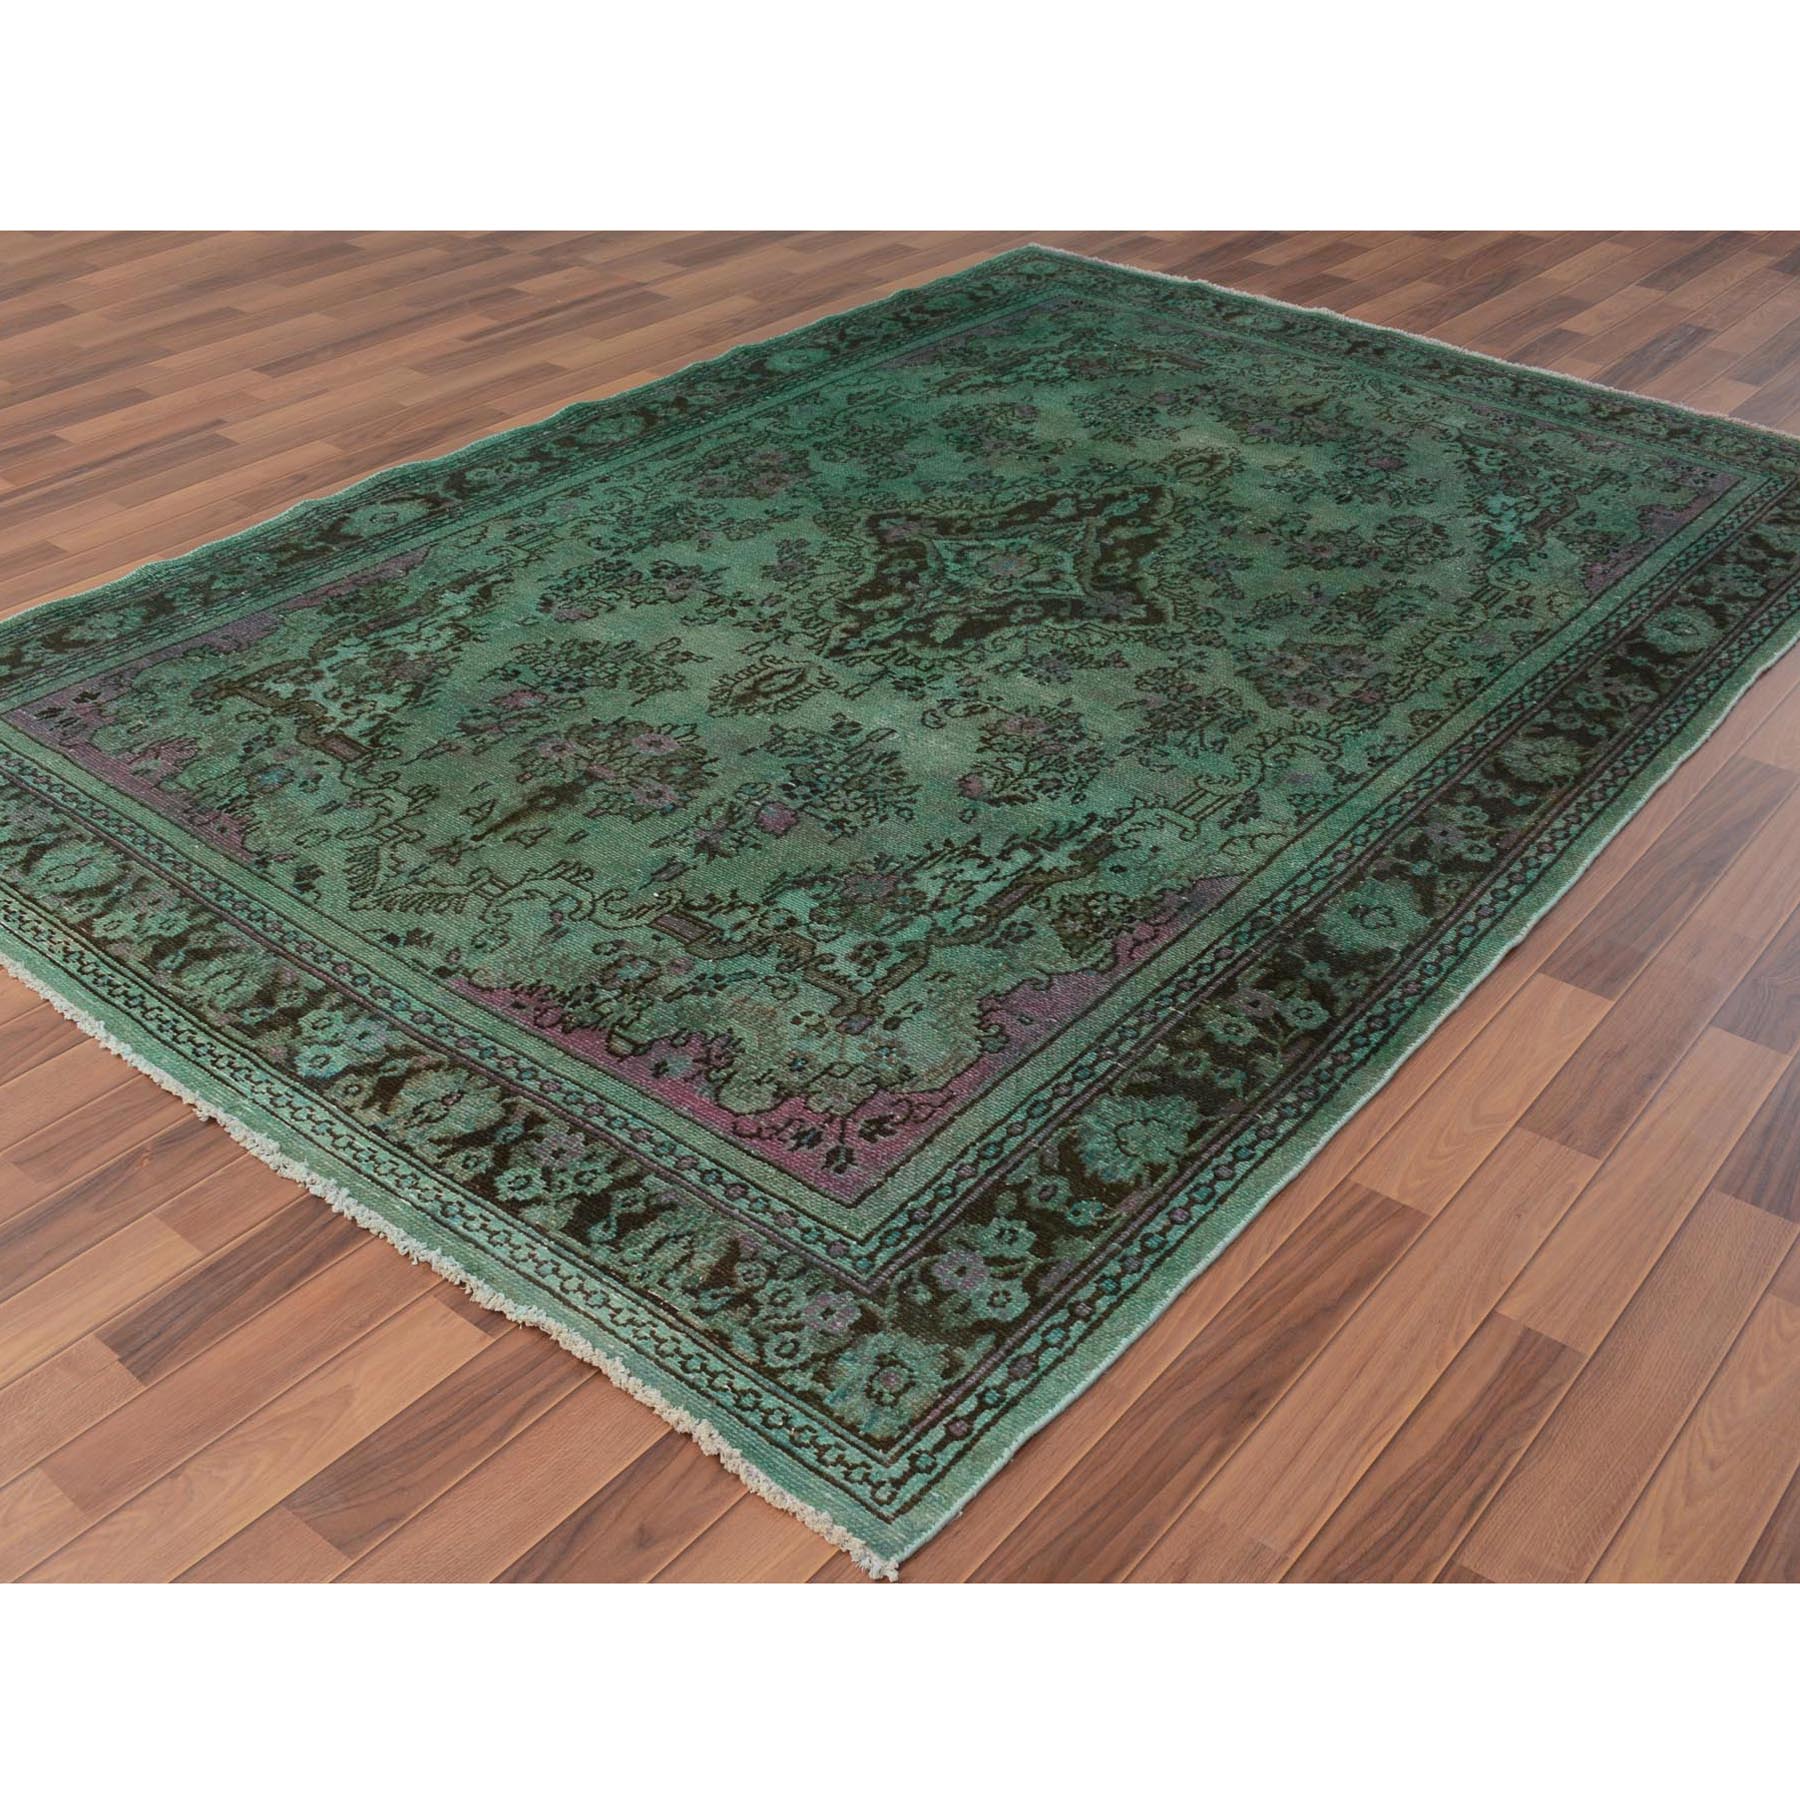 6-8 x9-9  Green Overdyed Vintage Bibikabad Persian Worn Down Hand Knotted Oriental Rug 